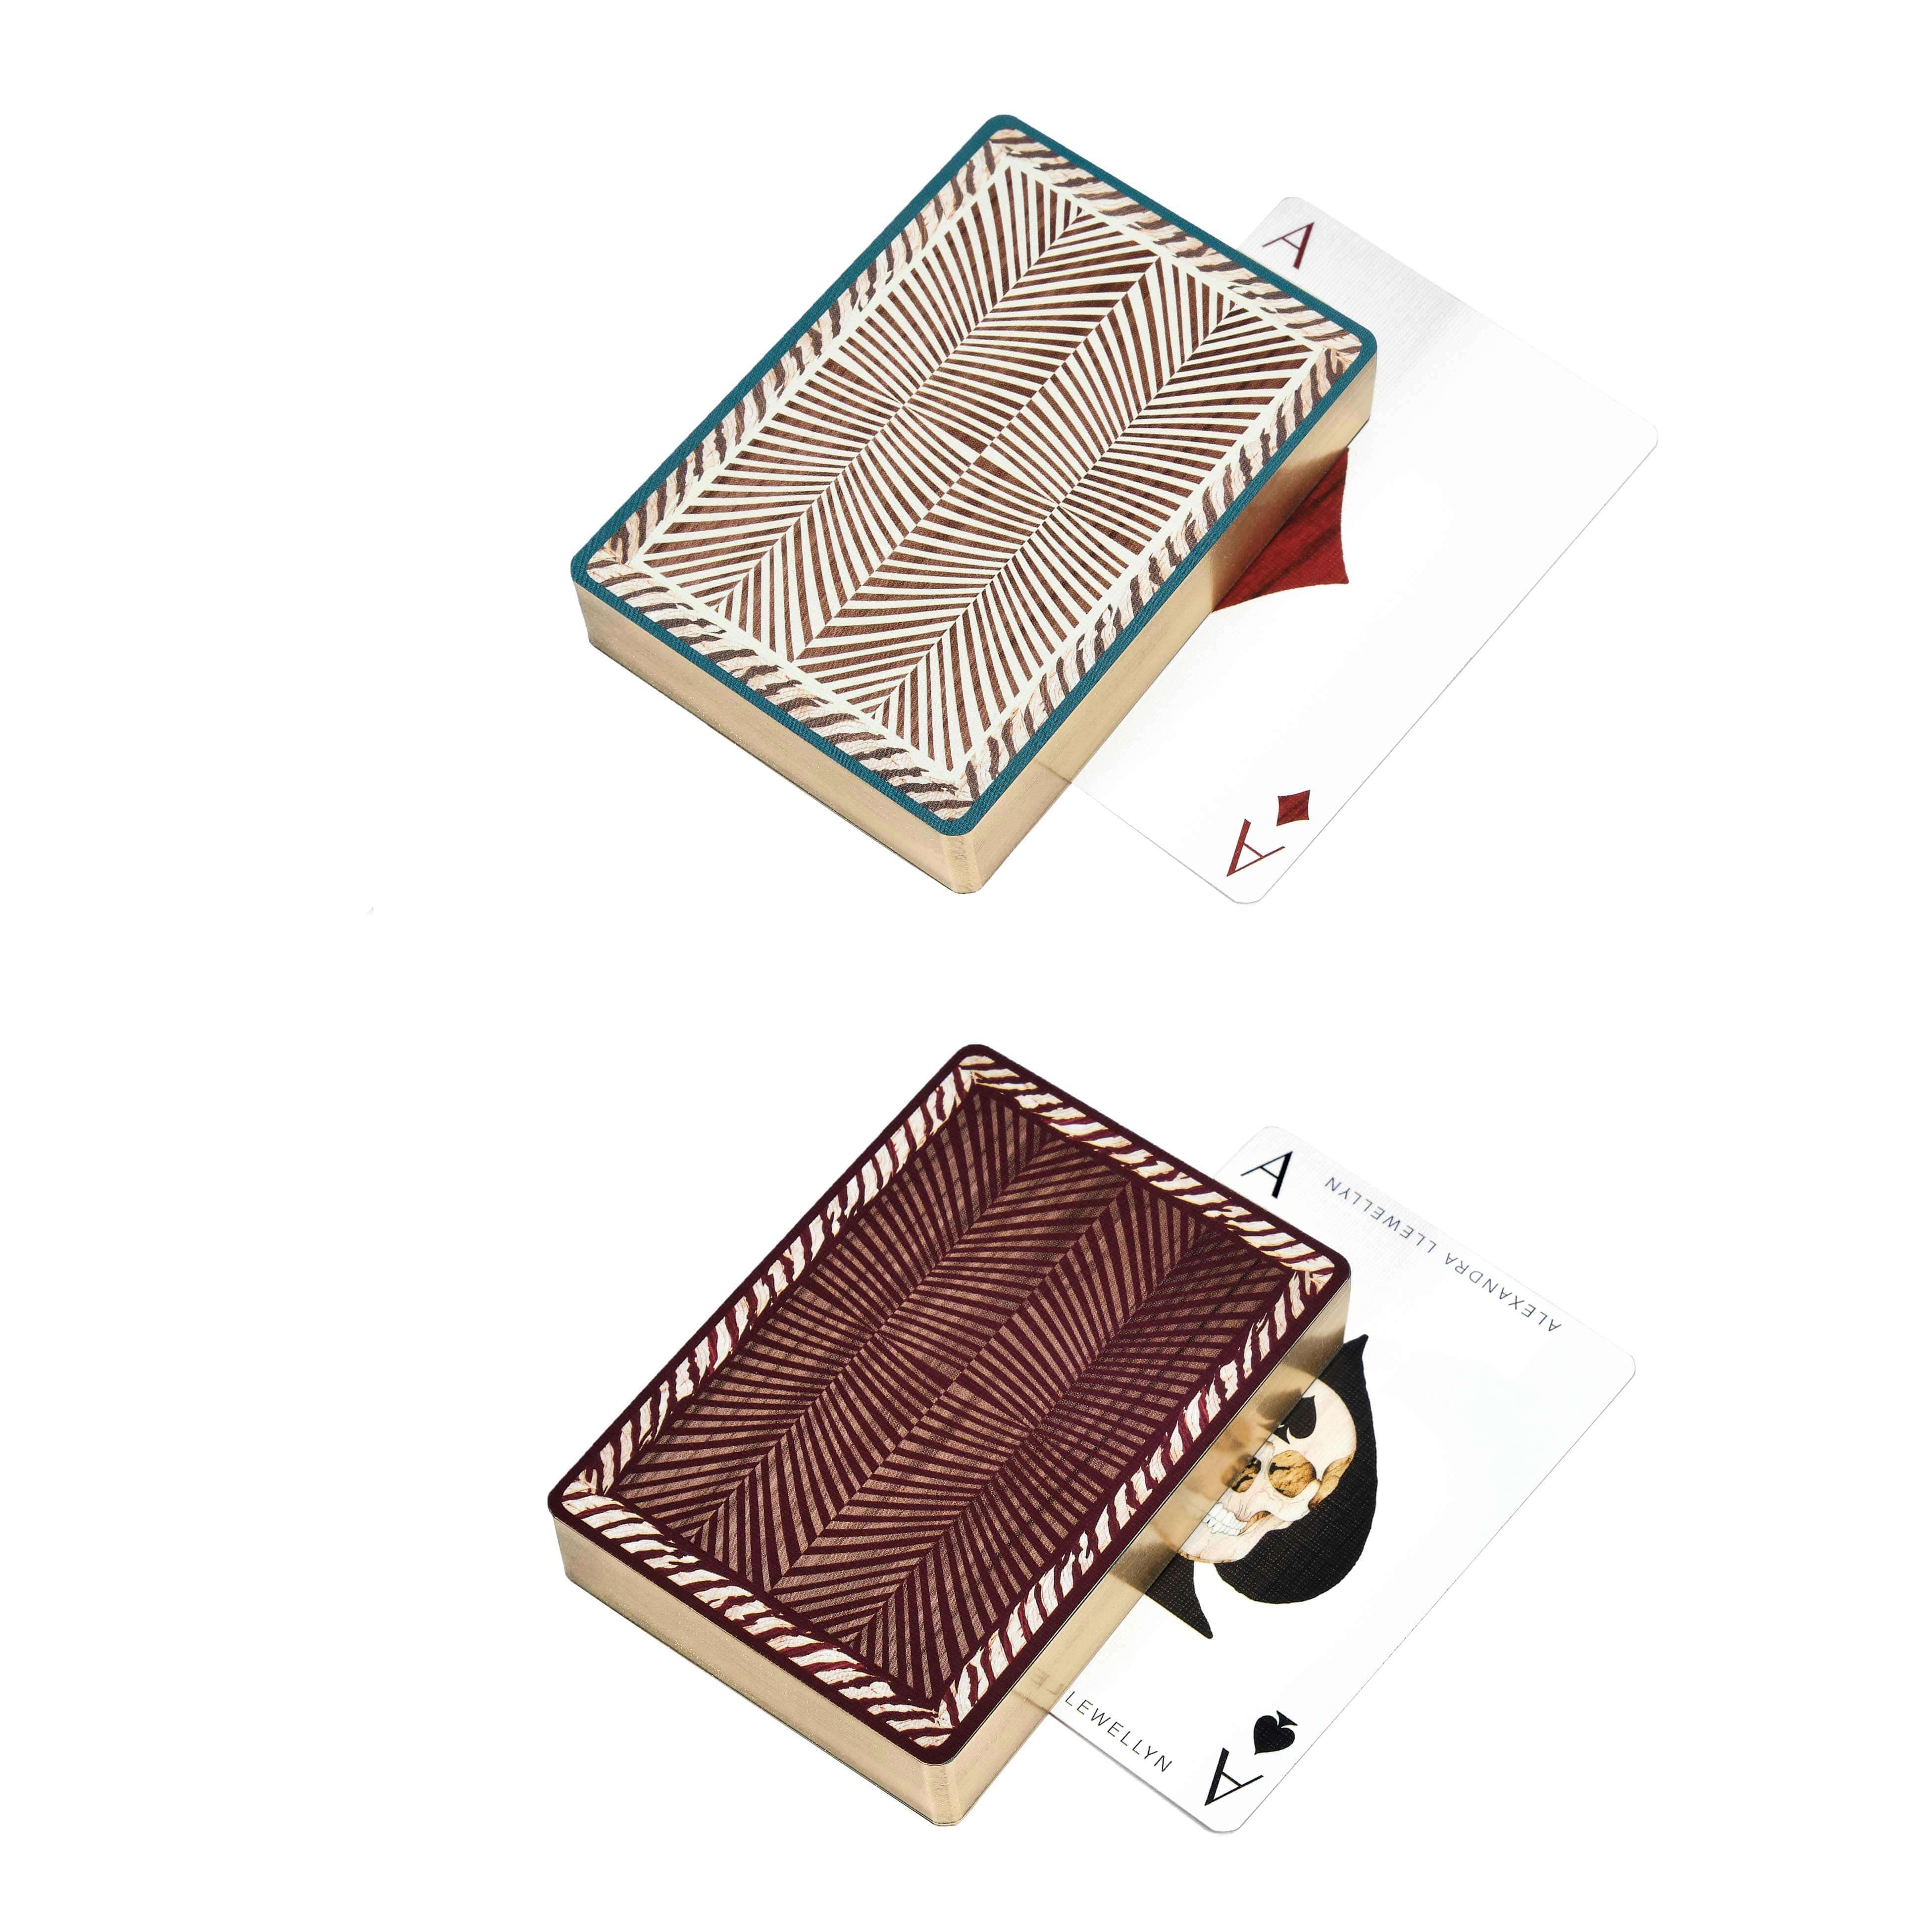 Two decks of Signature Playing cards in two colourways